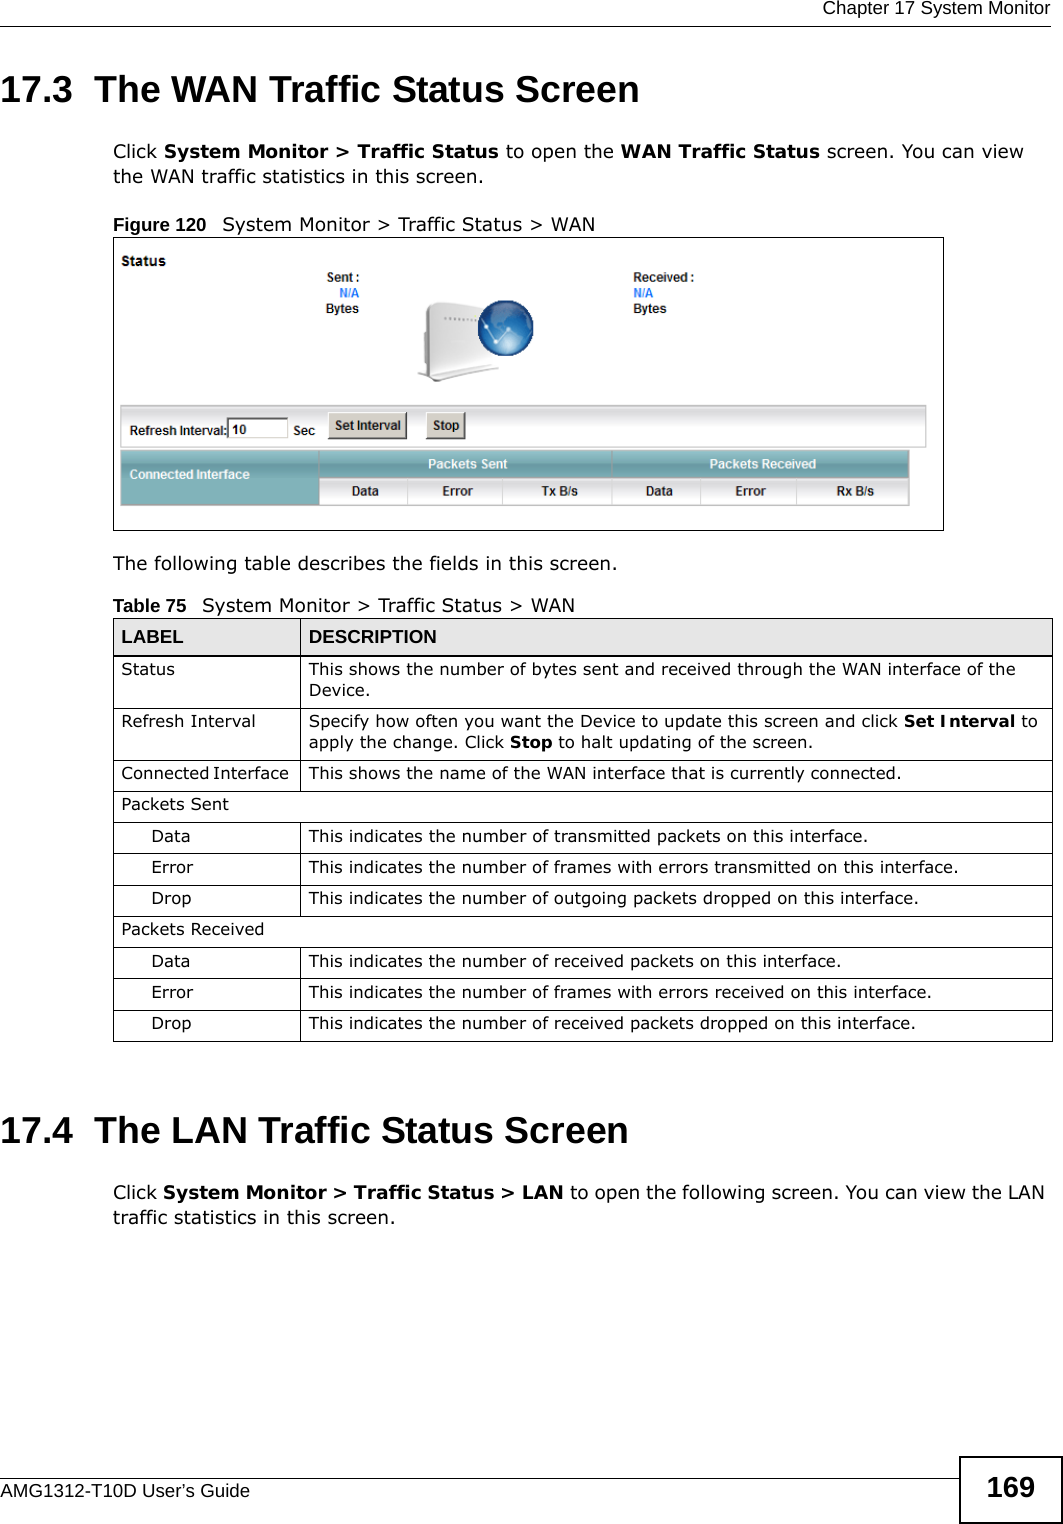  Chapter 17 System MonitorAMG1312-T10D User’s Guide 16917.3  The WAN Traffic Status Screen Click System Monitor &gt; Traffic Status to open the WAN Traffic Status screen. You can view the WAN traffic statistics in this screen.Figure 120   System Monitor &gt; Traffic Status &gt; WANThe following table describes the fields in this screen.   17.4  The LAN Traffic Status ScreenClick System Monitor &gt; Traffic Status &gt; LAN to open the following screen. You can view the LAN traffic statistics in this screen.Table 75   System Monitor &gt; Traffic Status &gt; WANLABEL DESCRIPTIONStatus This shows the number of bytes sent and received through the WAN interface of the Device.Refresh Interval Specify how often you want the Device to update this screen and click Set Interval to apply the change. Click Stop to halt updating of the screen.Connected Interface  This  shows the name of the WAN interface that is currently connected.Packets Sent Data  This indicates the number of transmitted packets on this interface.Error This indicates the number of frames with errors transmitted on this interface.Drop This indicates the number of outgoing packets dropped on this interface.Packets ReceivedData  This indicates the number of received packets on this interface.Error This indicates the number of frames with errors received on this interface.Drop This indicates the number of received packets dropped on this interface.